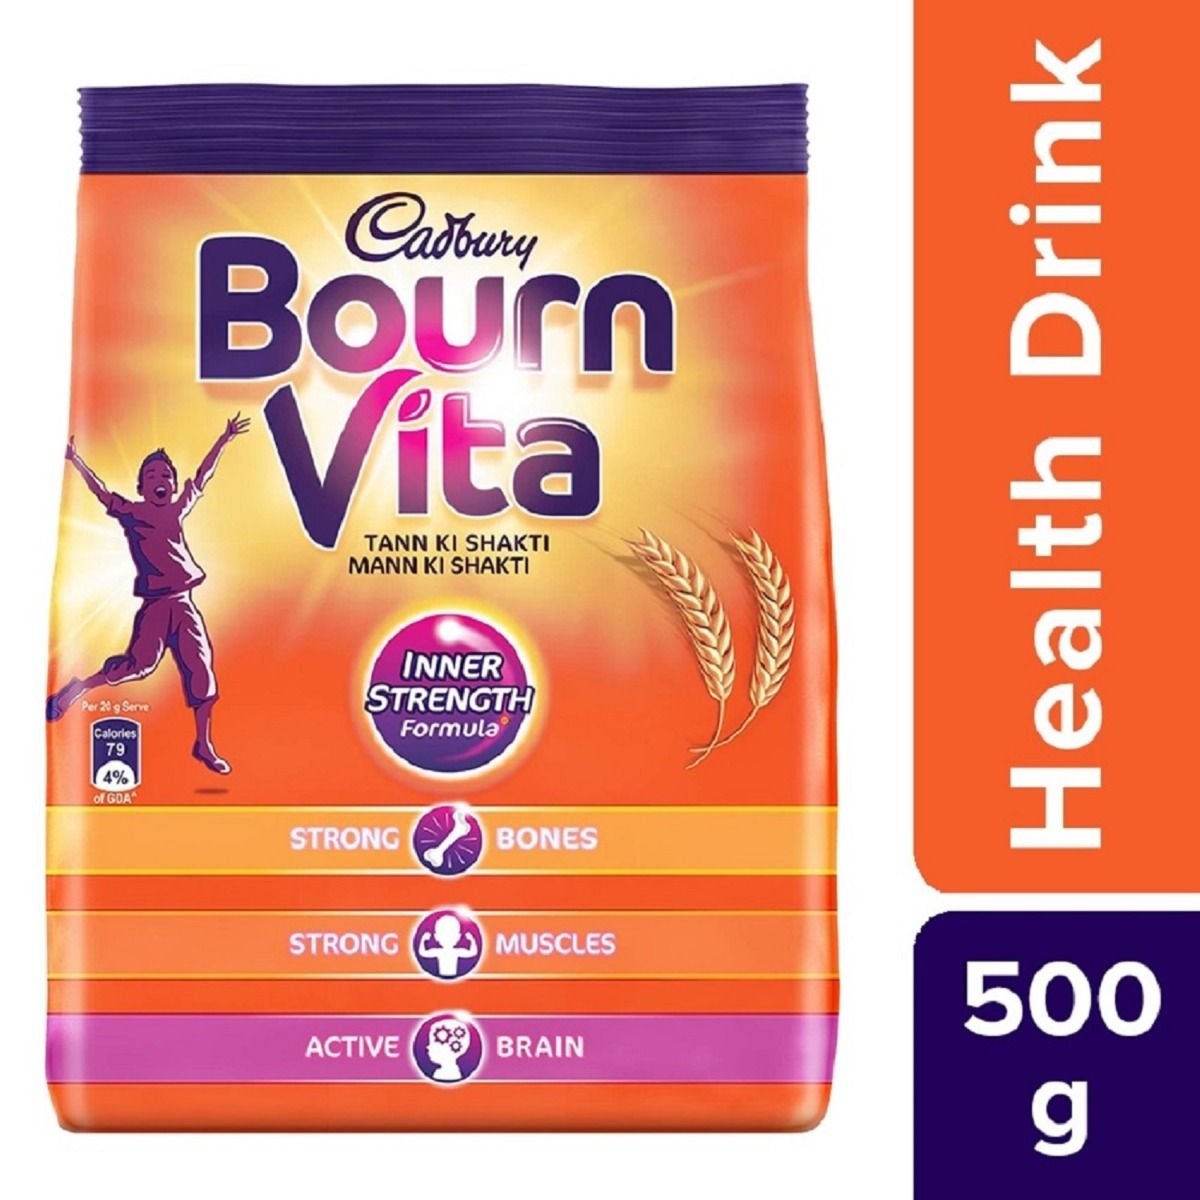 Bournvita Nutrition Drink, 500 gm Refill Pack, Pack of 1 